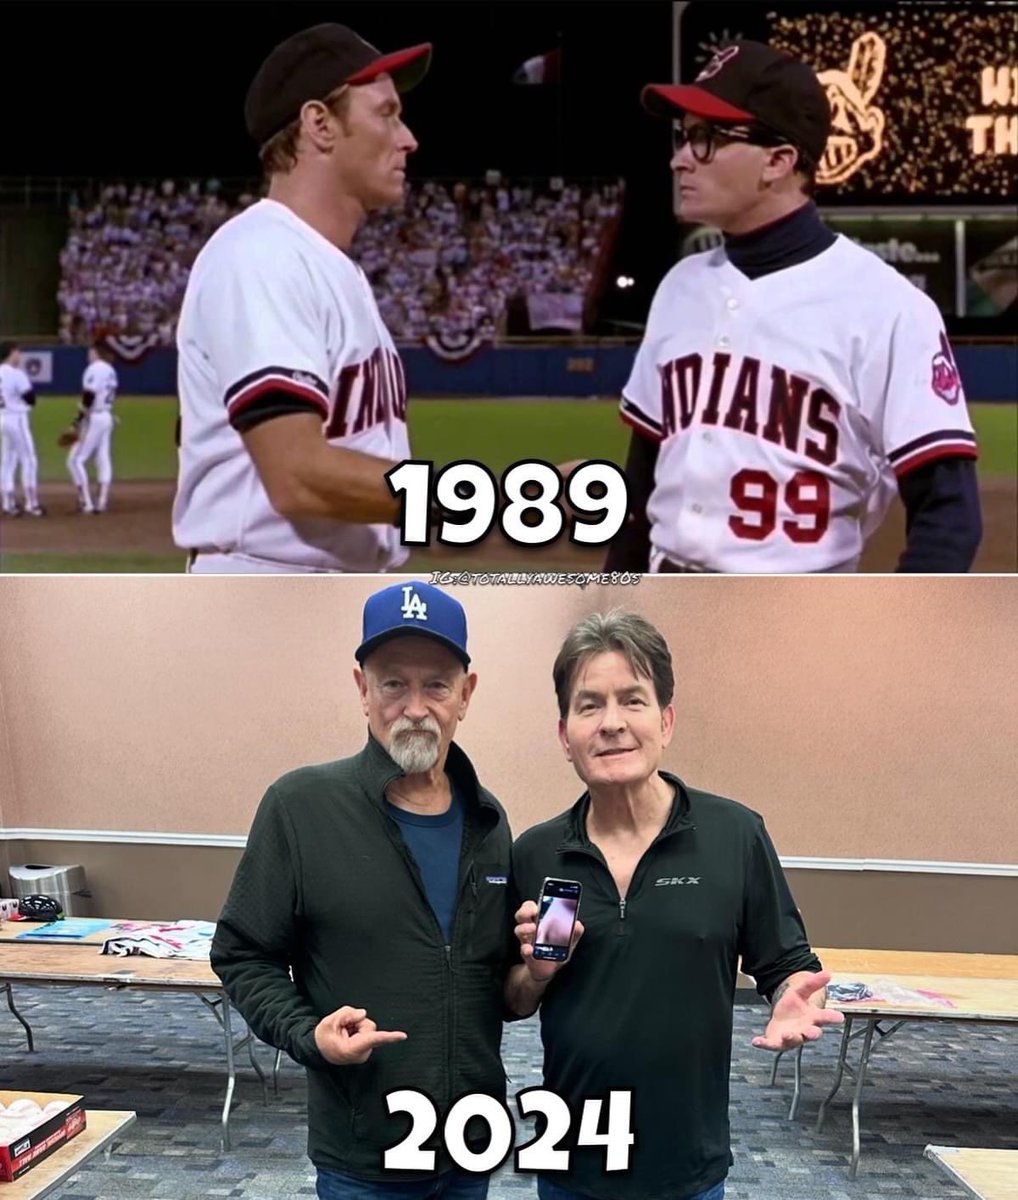 Roger Dorn and “Wild Thing” Ricky Vaughn reunited after 35 years

#majorleague #corbinbernsen #charliesheen #the80s #80s #80smovies #80scomedy #1980s #1980smovies #theeighties #eighties #eightiesmovies #movies #totallyawesome80s #comedy #baseball #clevelandindians